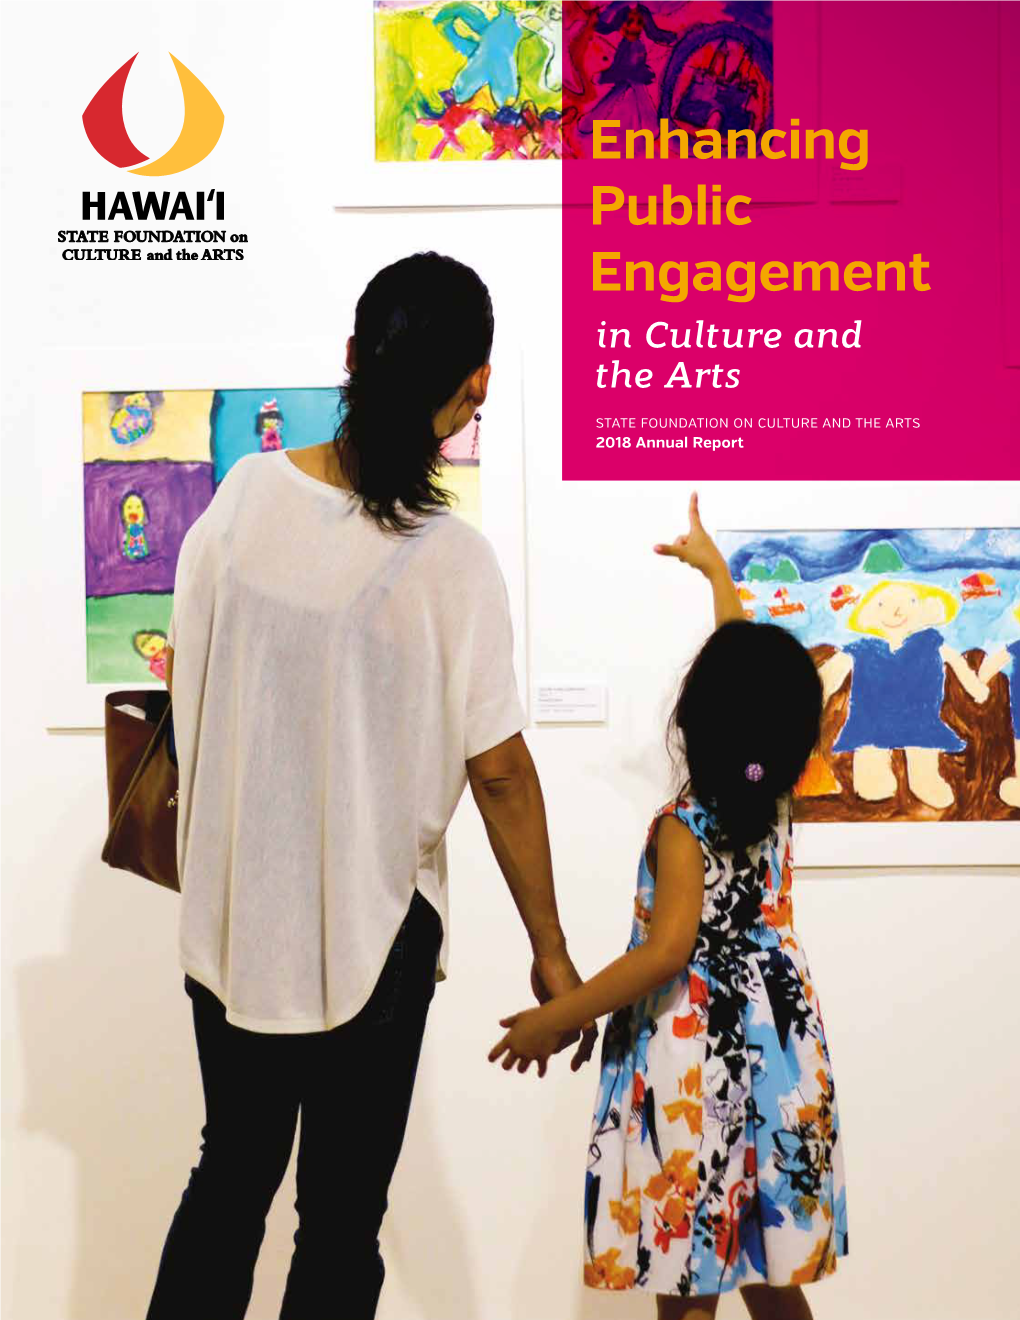 Enhancing Public Engagement in Culture and the Arts